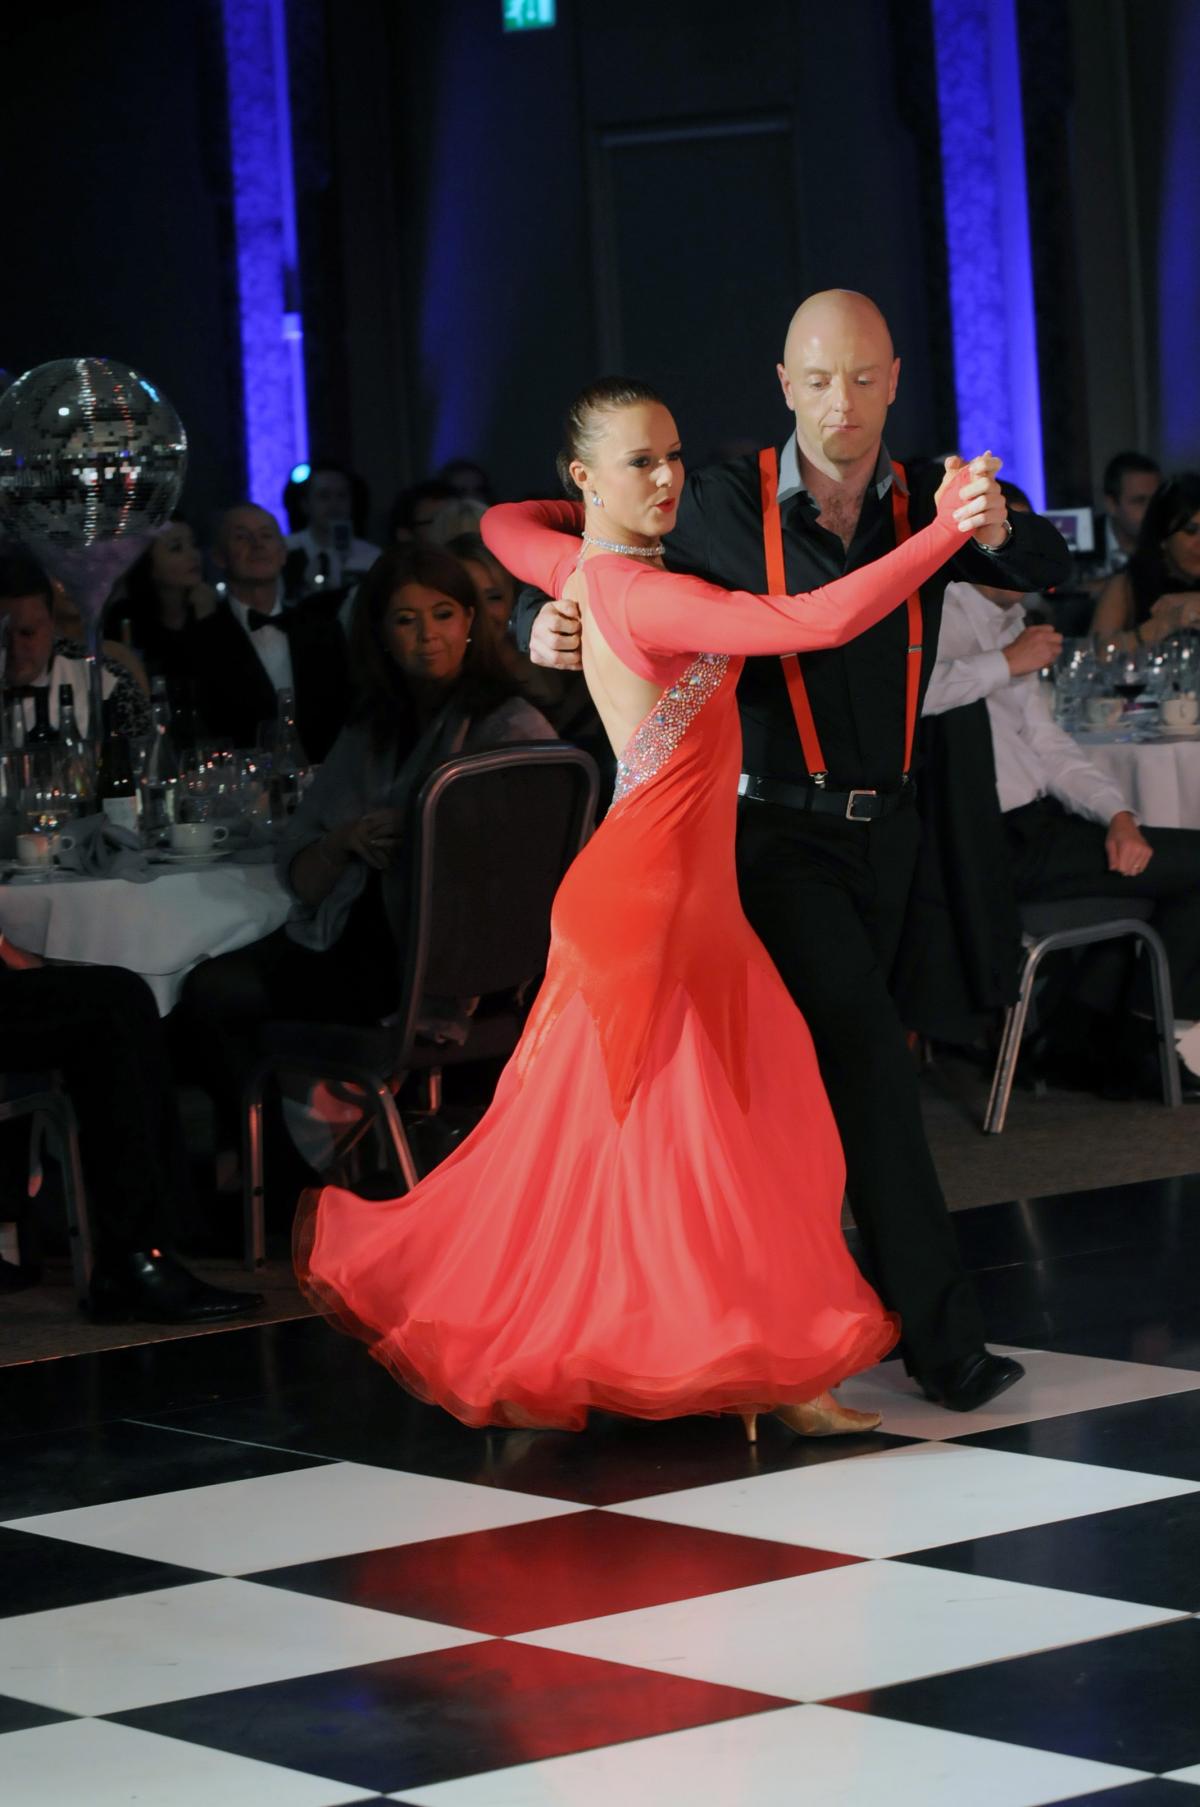 Gary Cookson leading the way in his Argentine tango